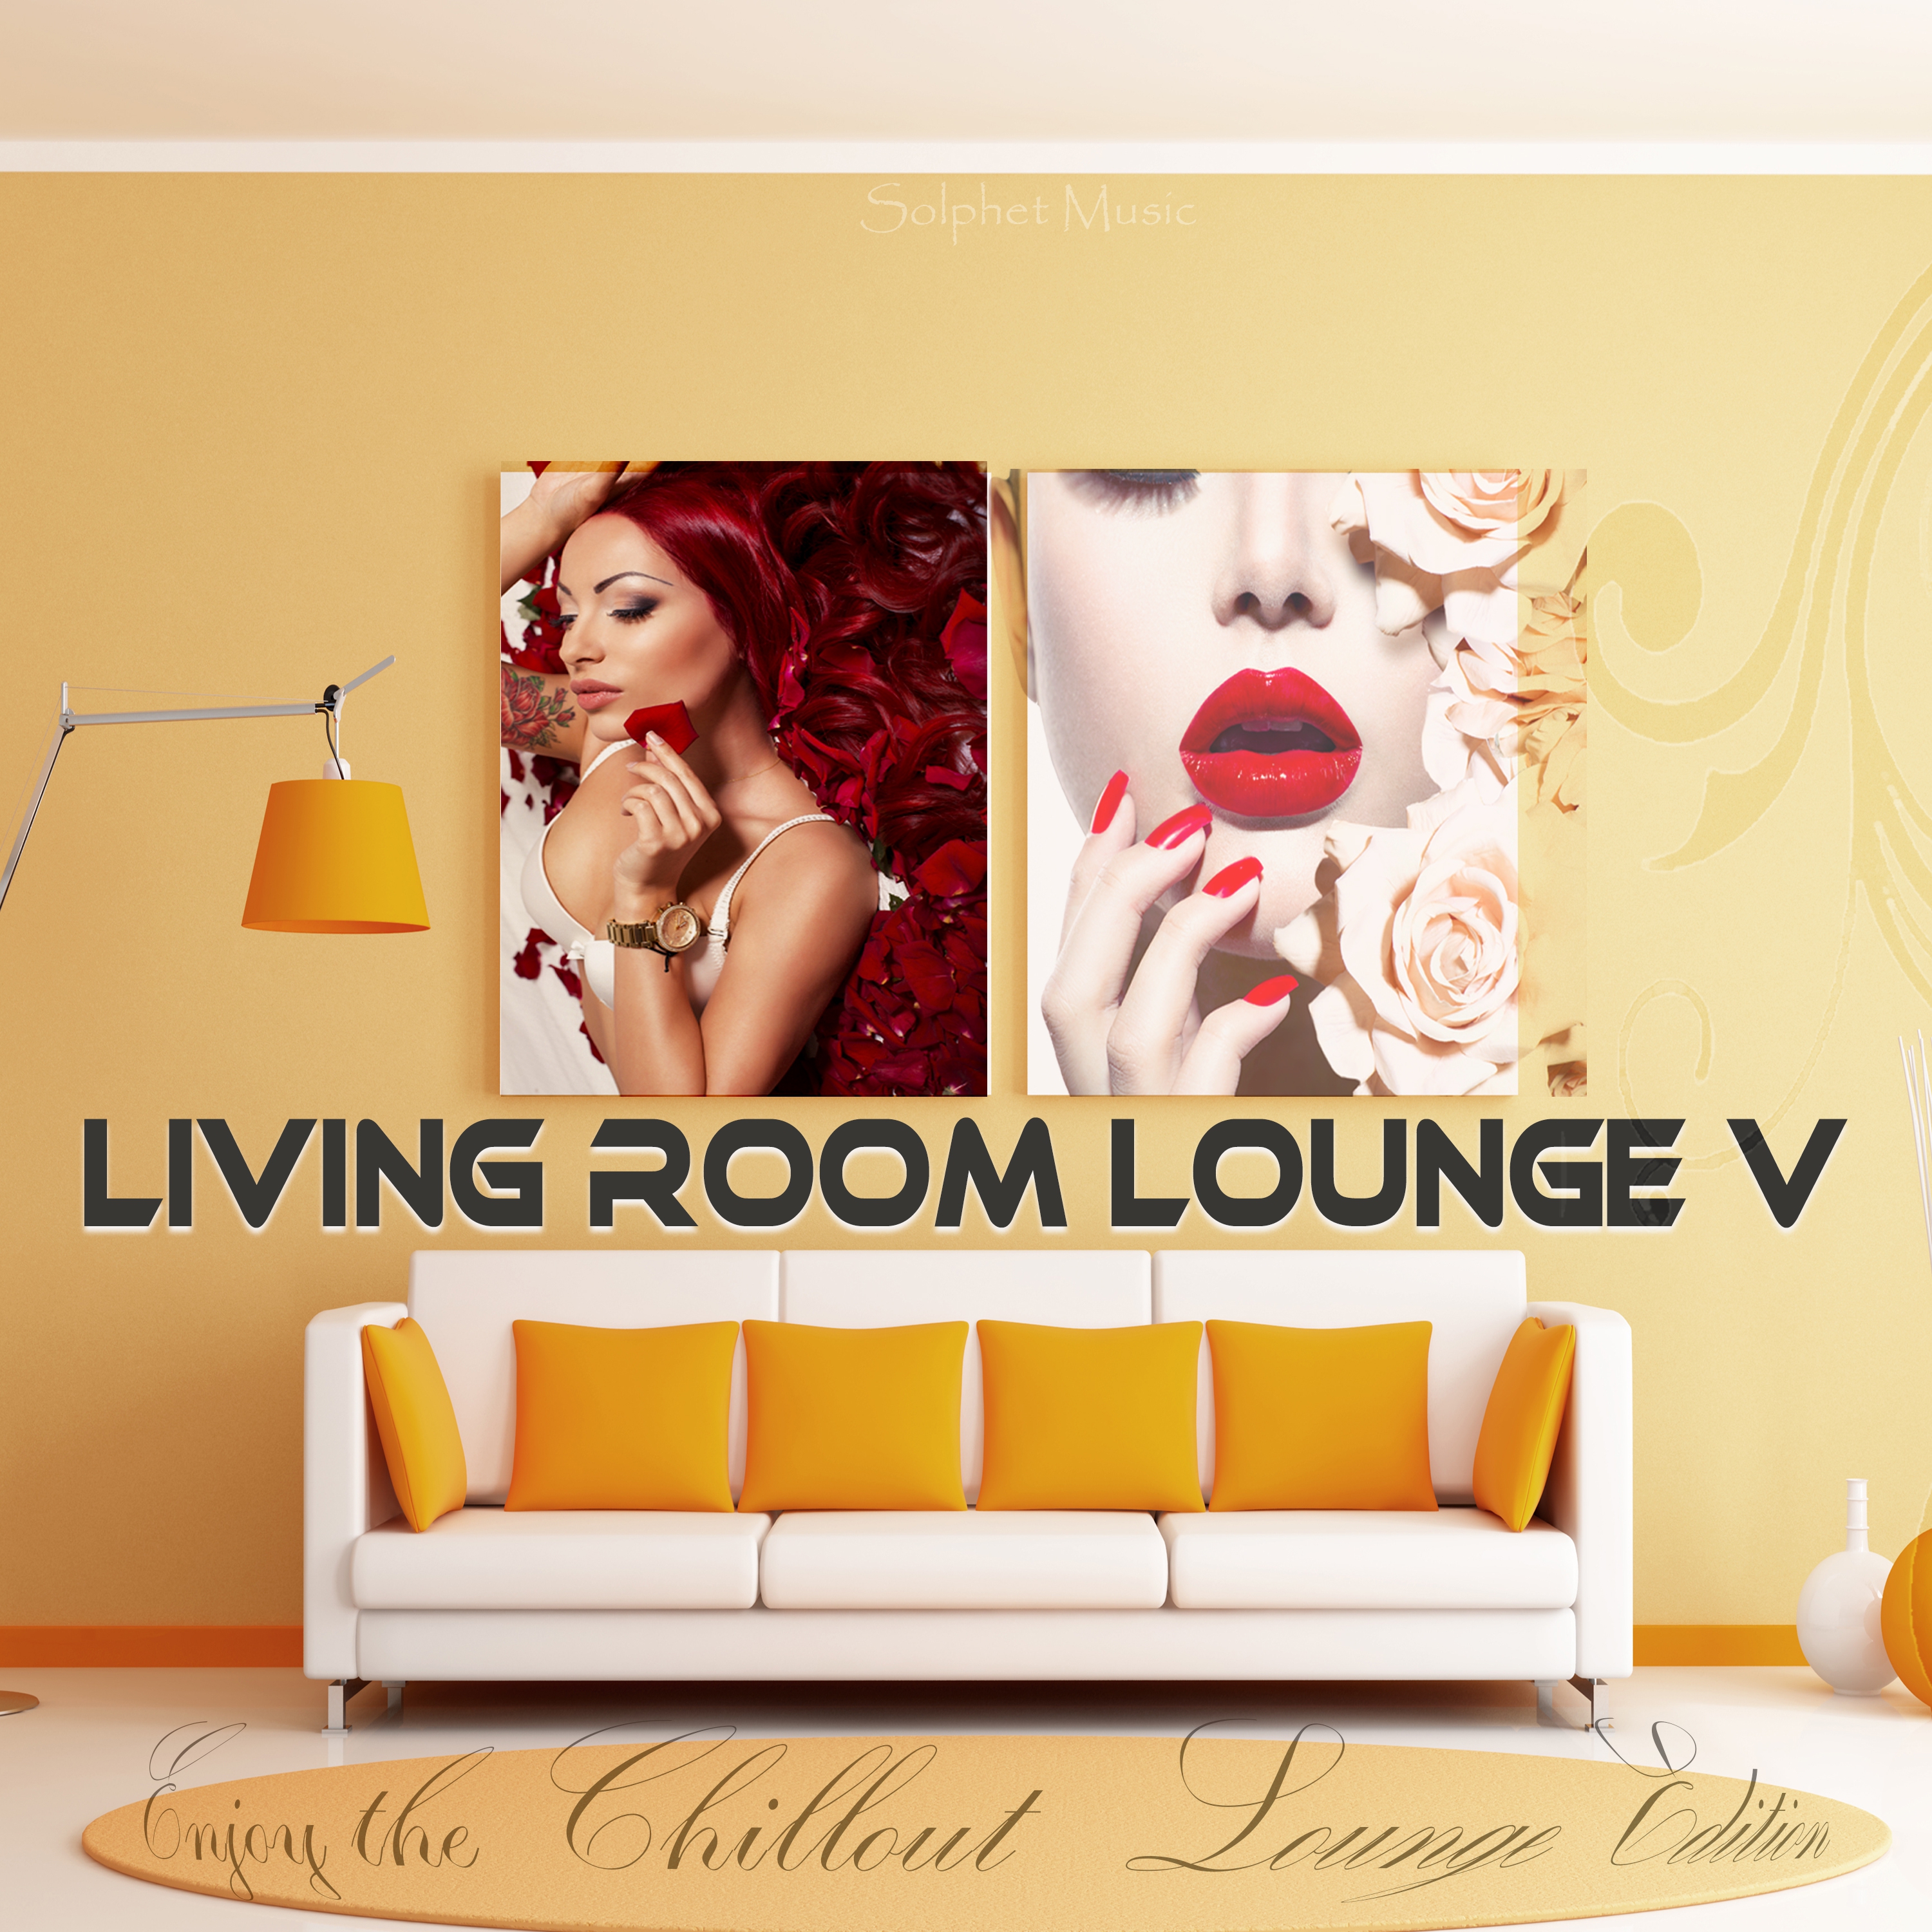 Living Room Lounge 5 - Enjoy the Chillout Lounge Edition